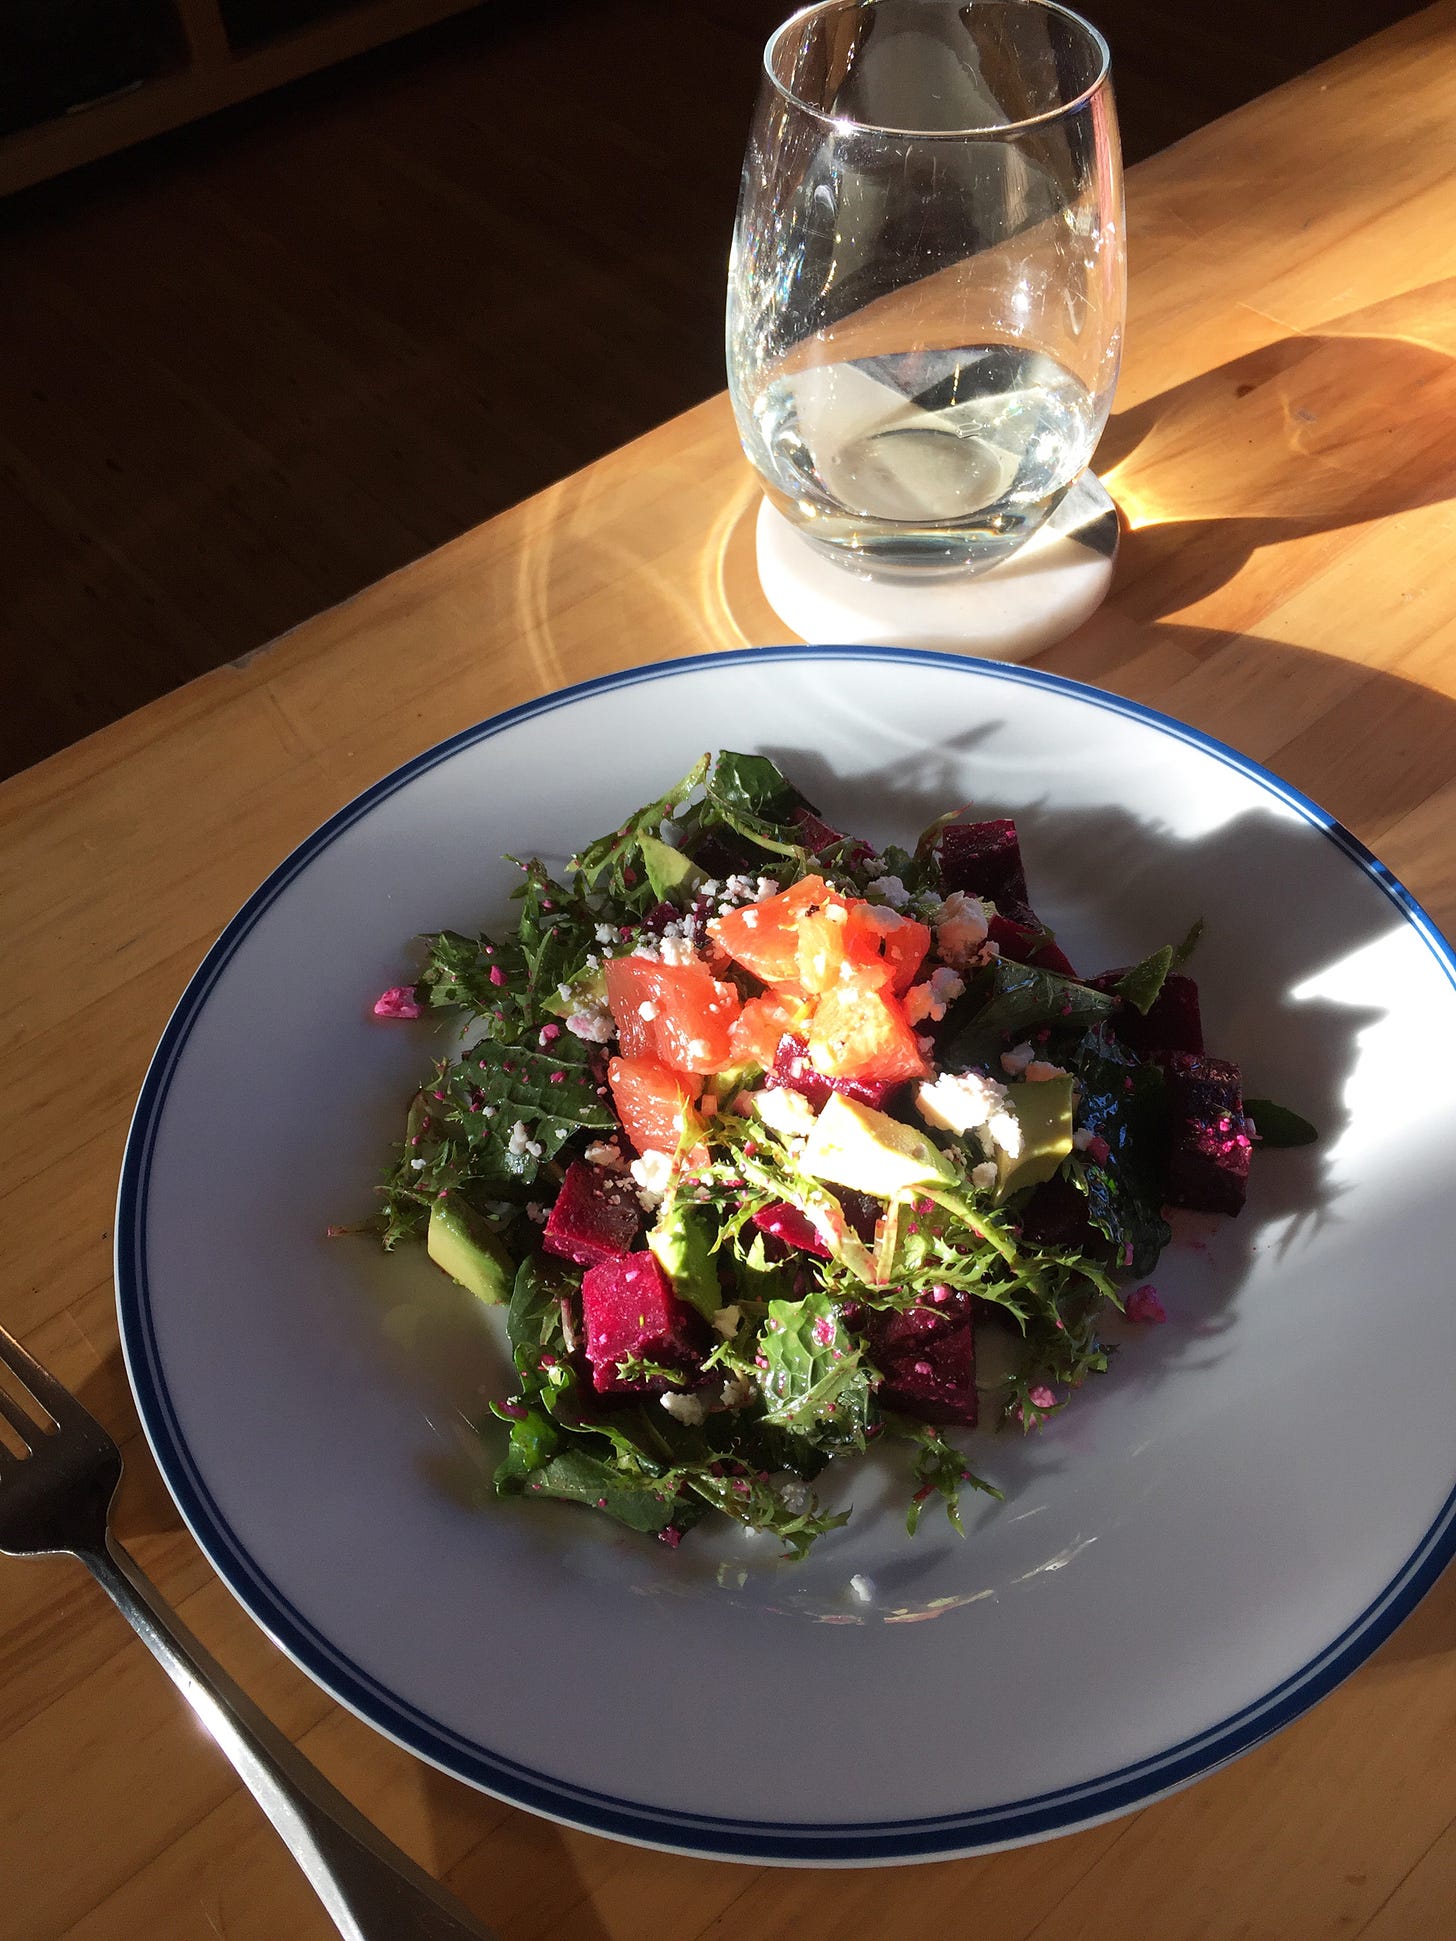 a plate of beet salad with dark greens, avocado, crumbles of feta, and grapefruit segments on top. The plate site in a patch of sun on a wooden table with a glass of white wine at the upper corner.